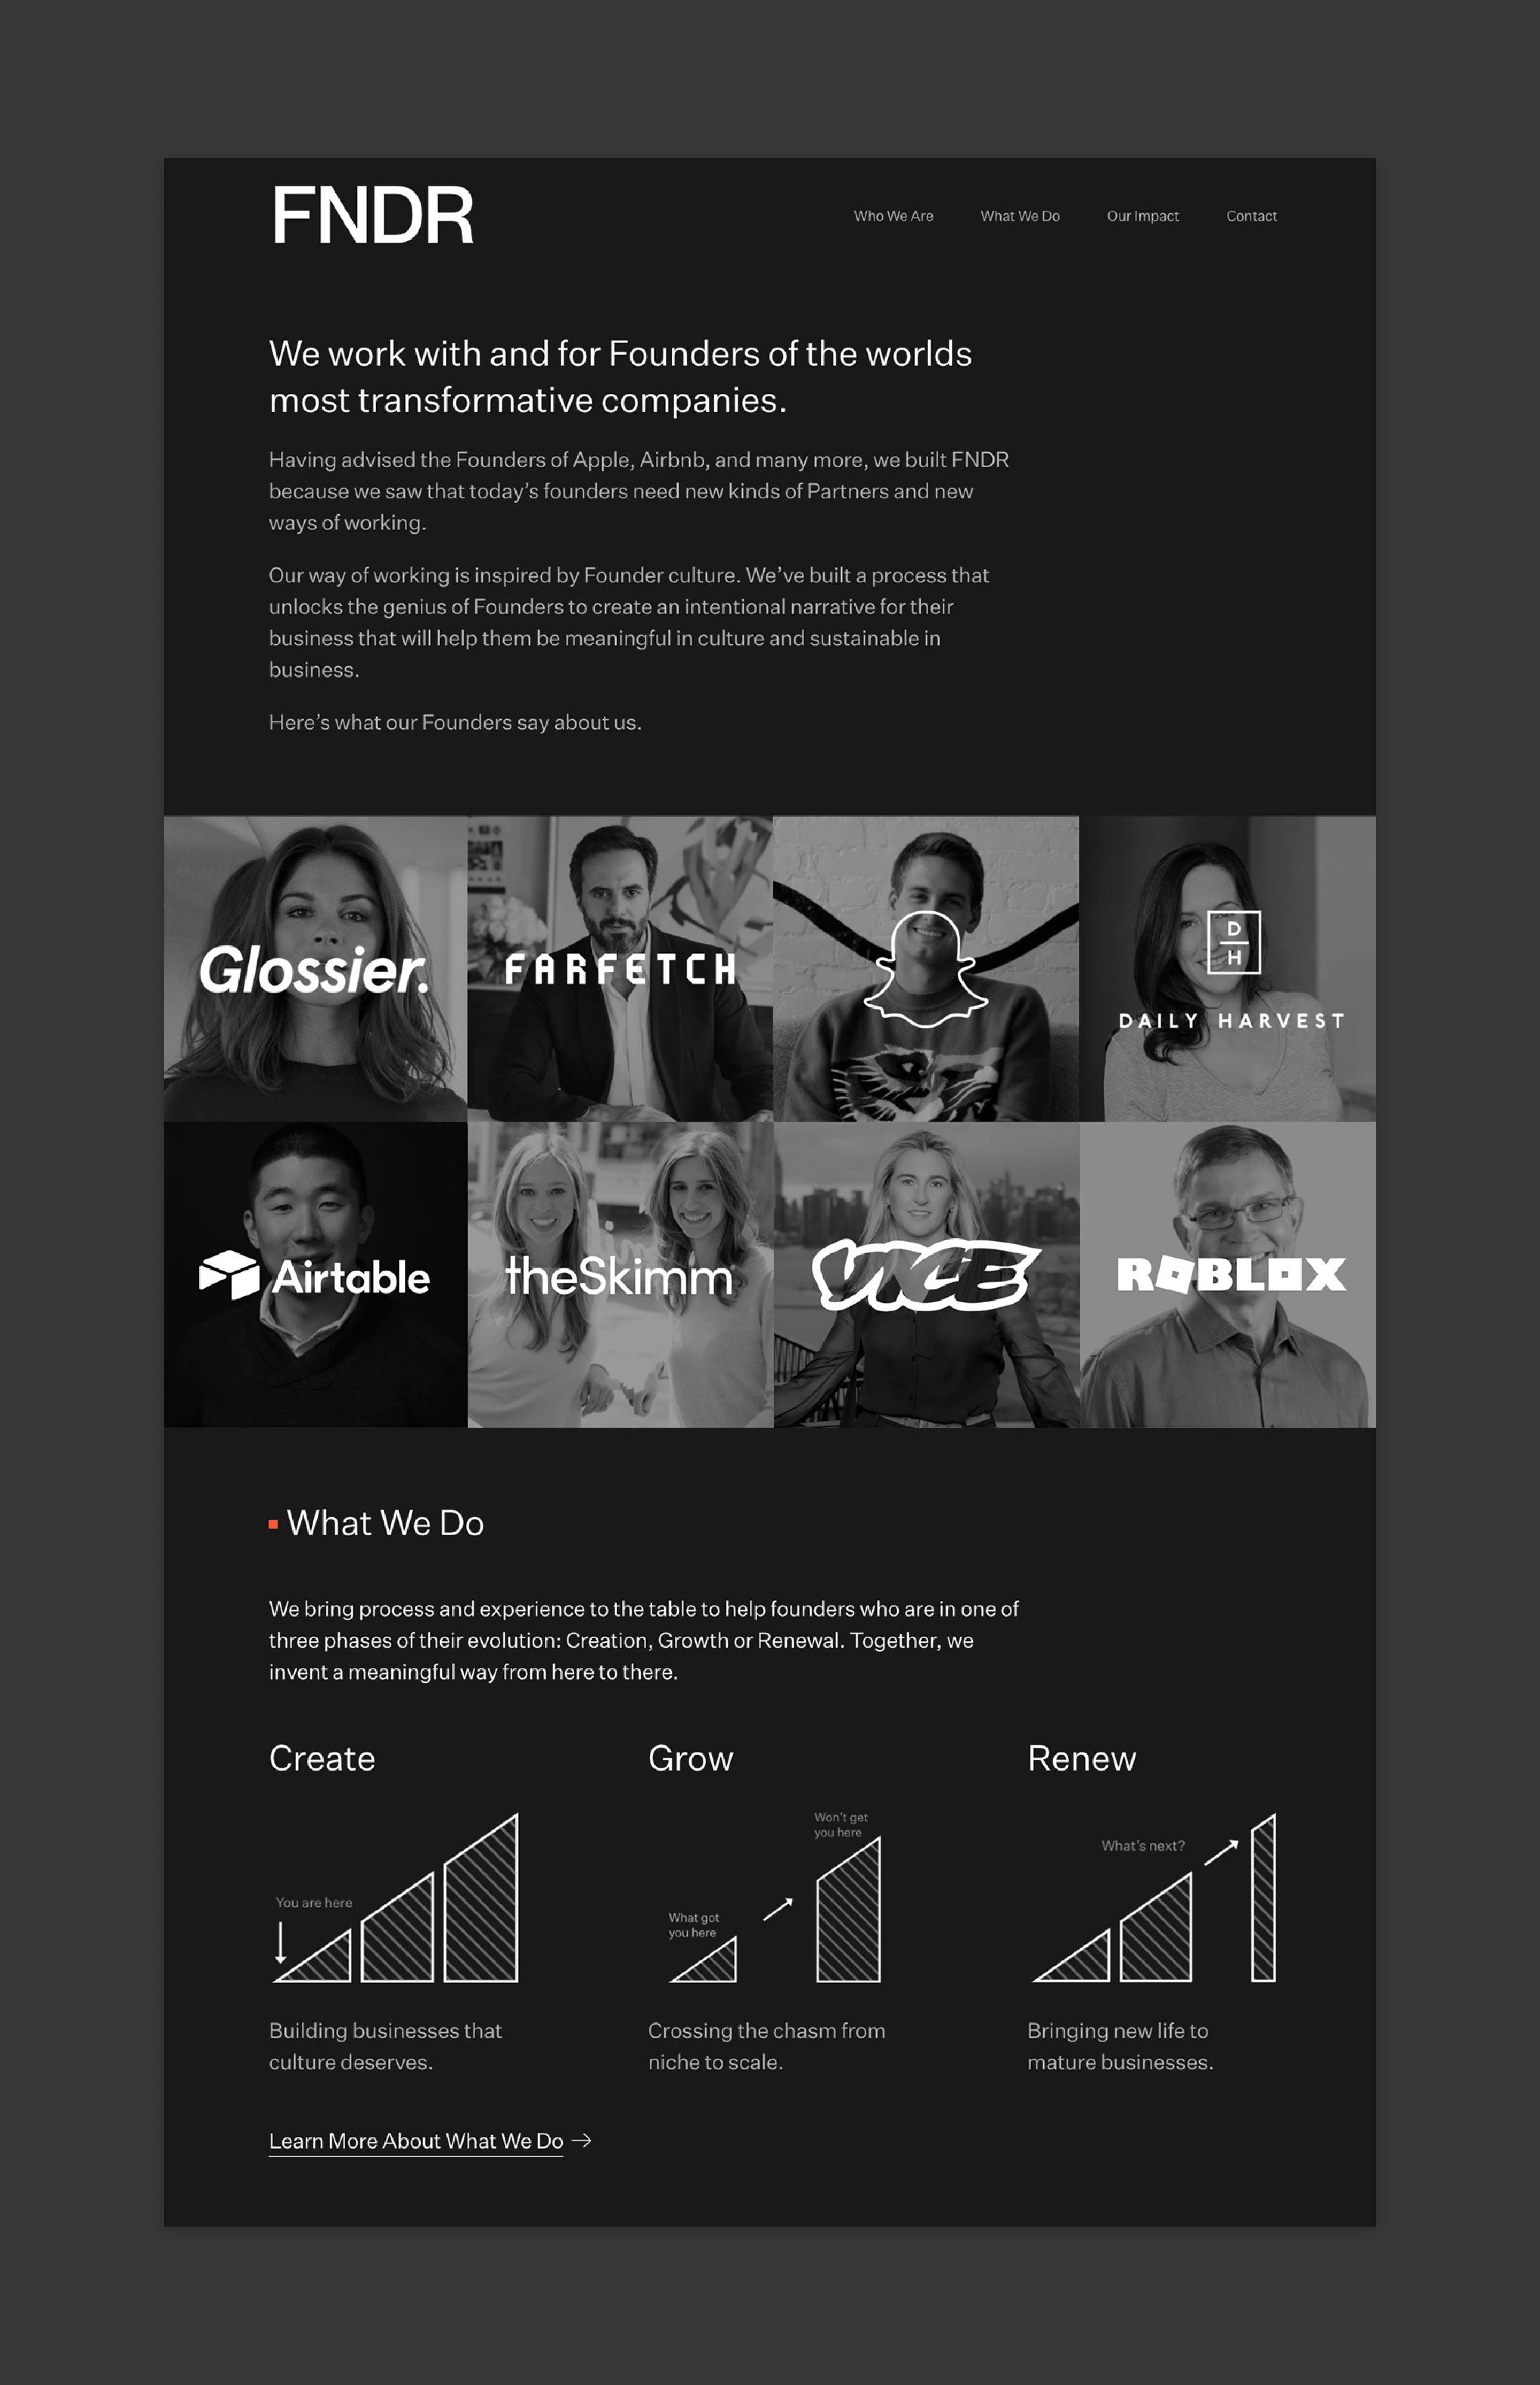 A flat comp of the FNDR homepage. It's a black background with text up top, a grid of Founders and their company logos over their faces, and a graph of what they do - from Create to Grow to Renew.